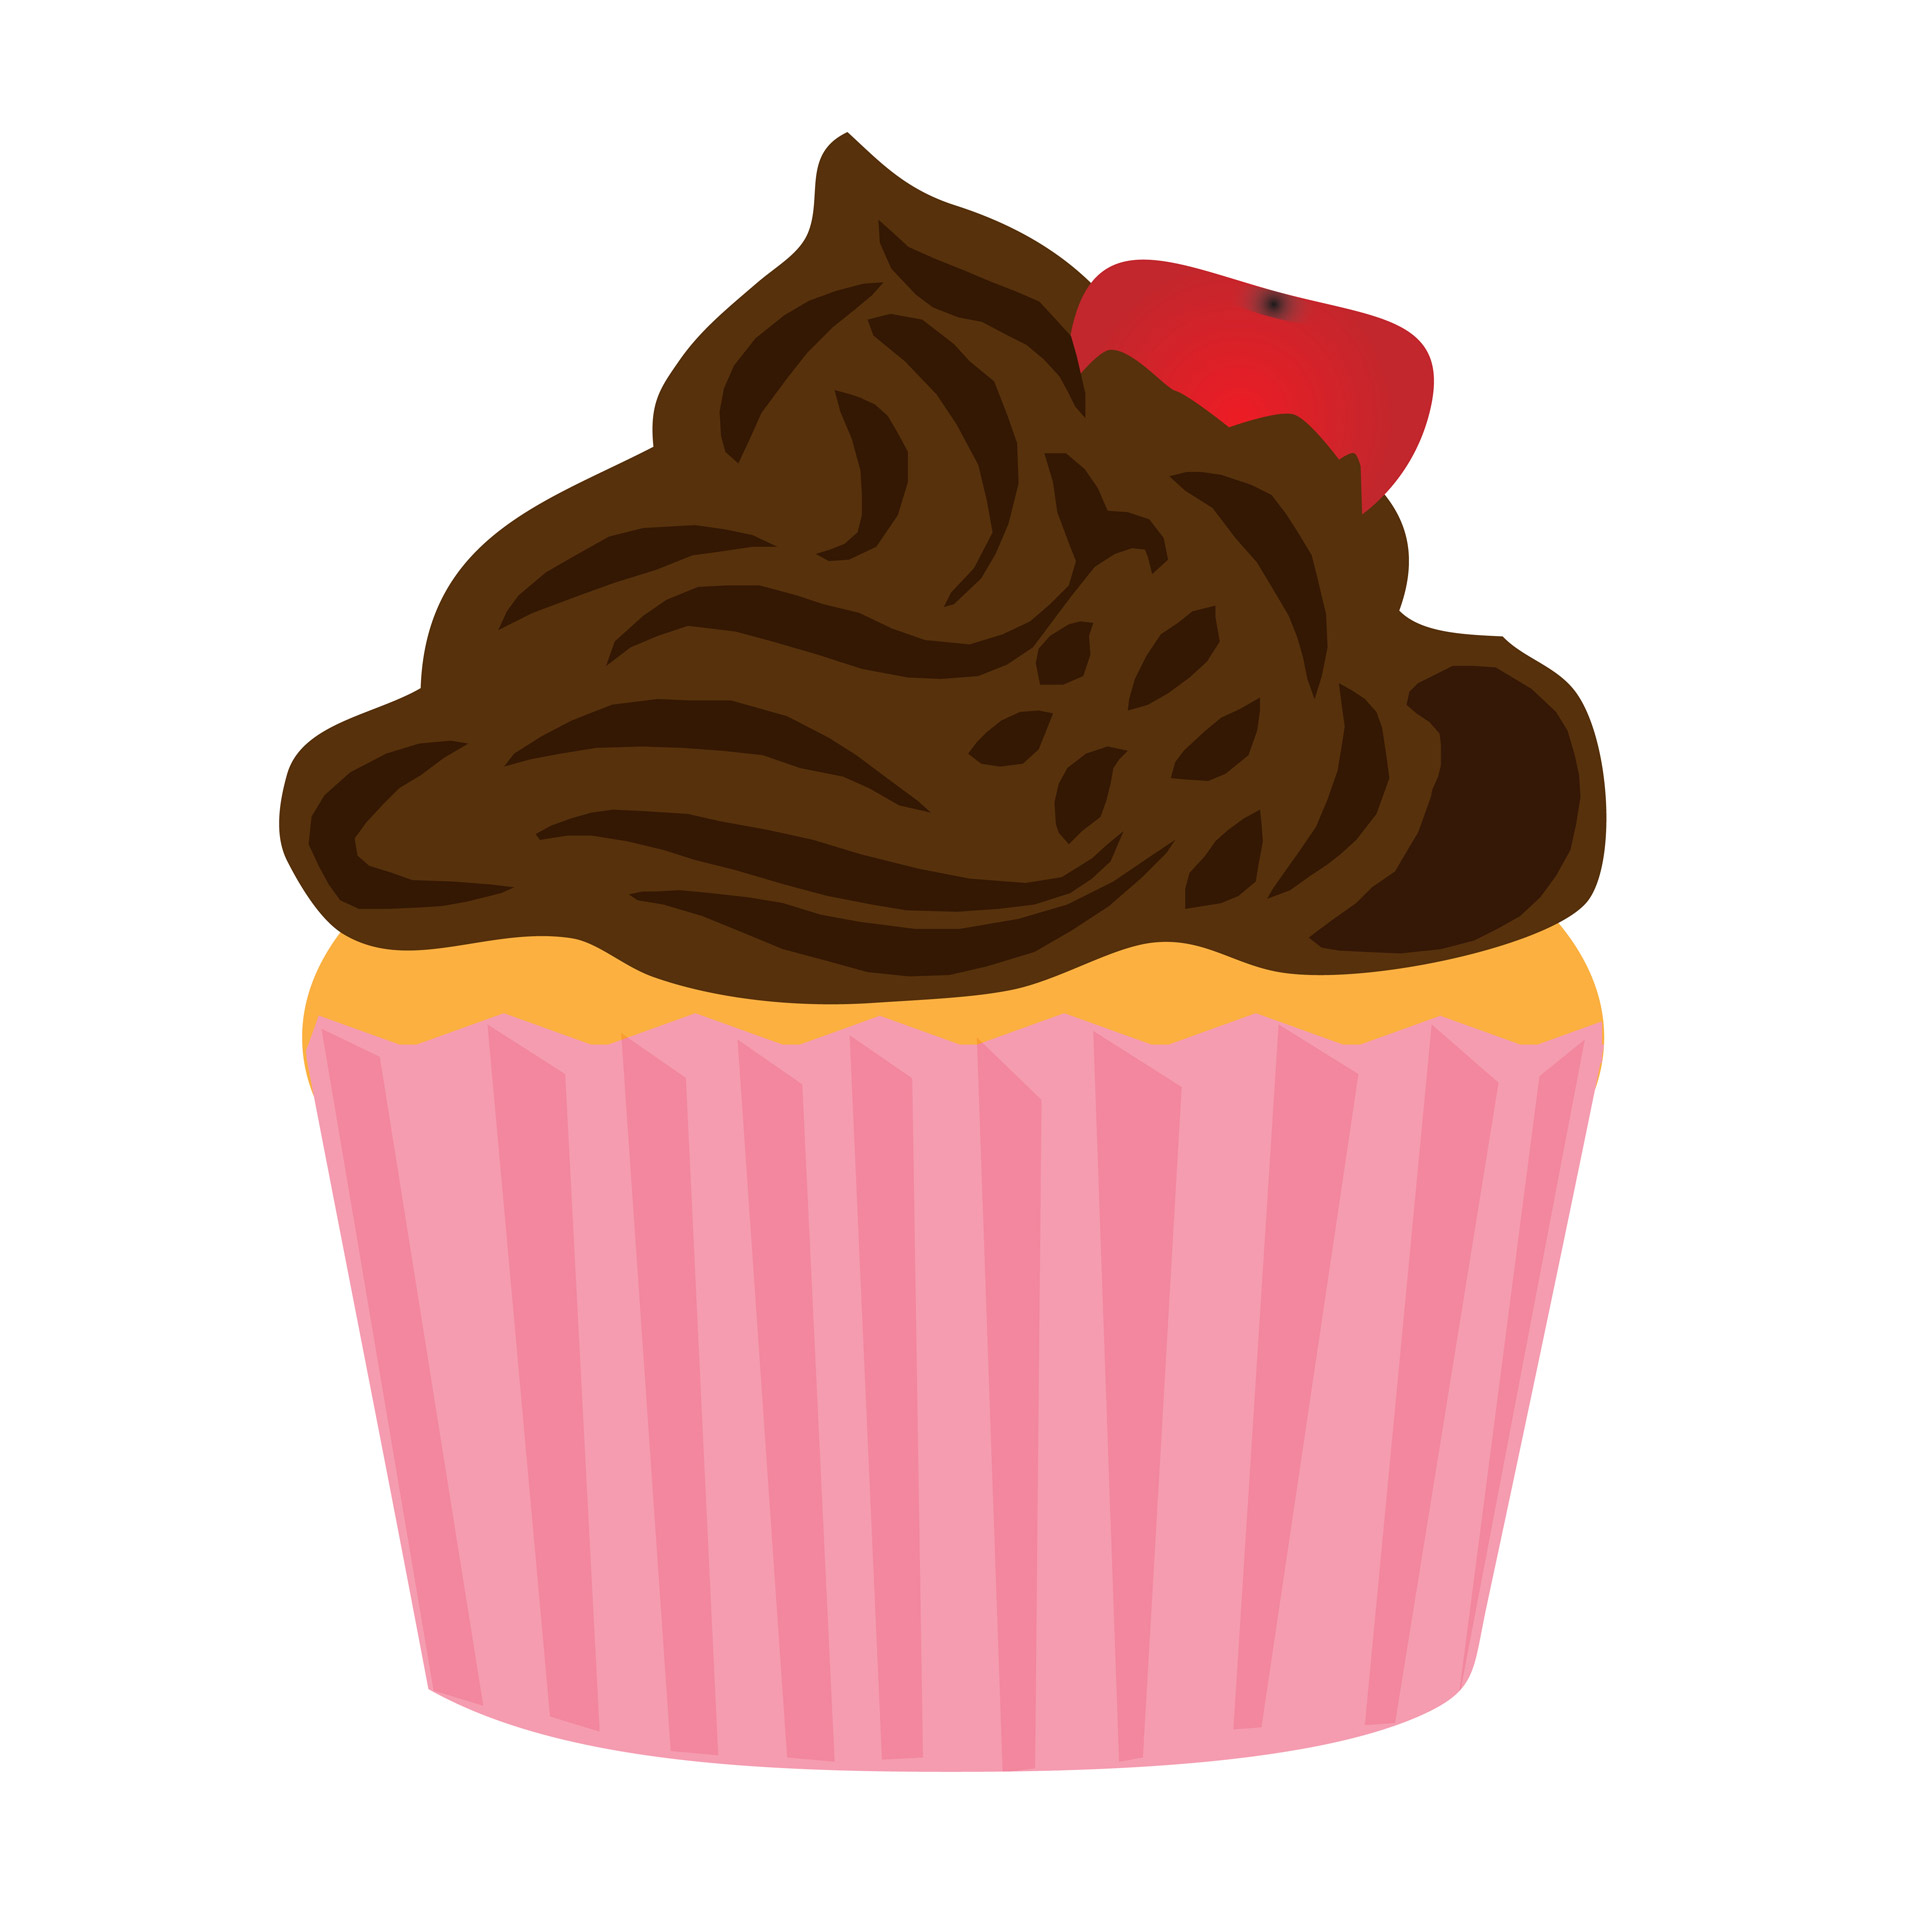 Big chocolate cupcake clipart for scrapbooking